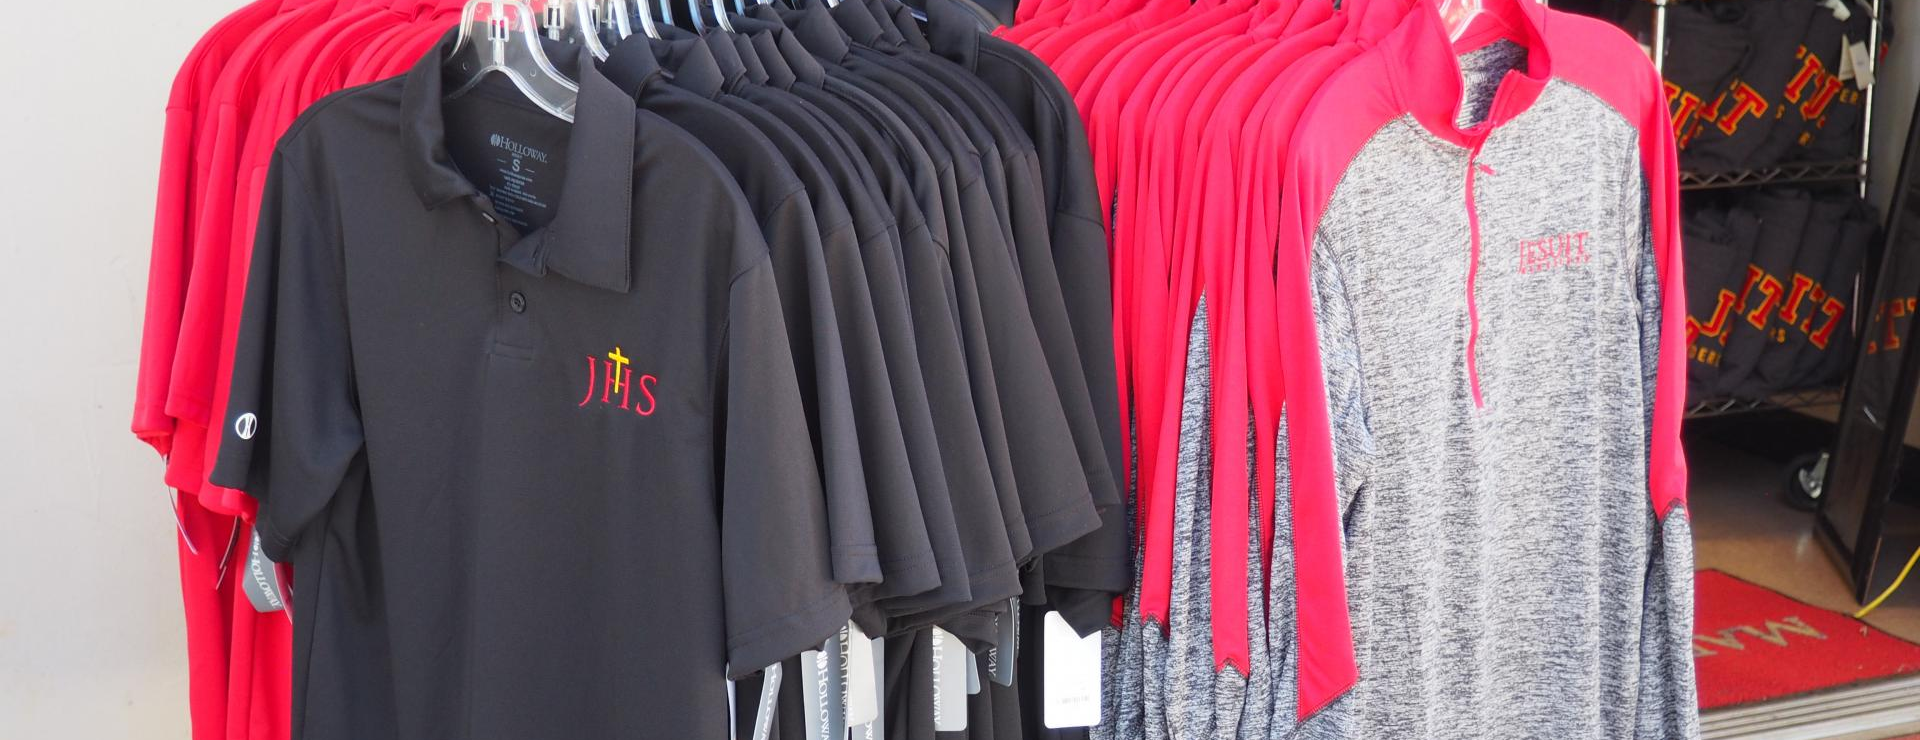 Clothing rack showing long and short sleeved shirts with Jesuit Logo